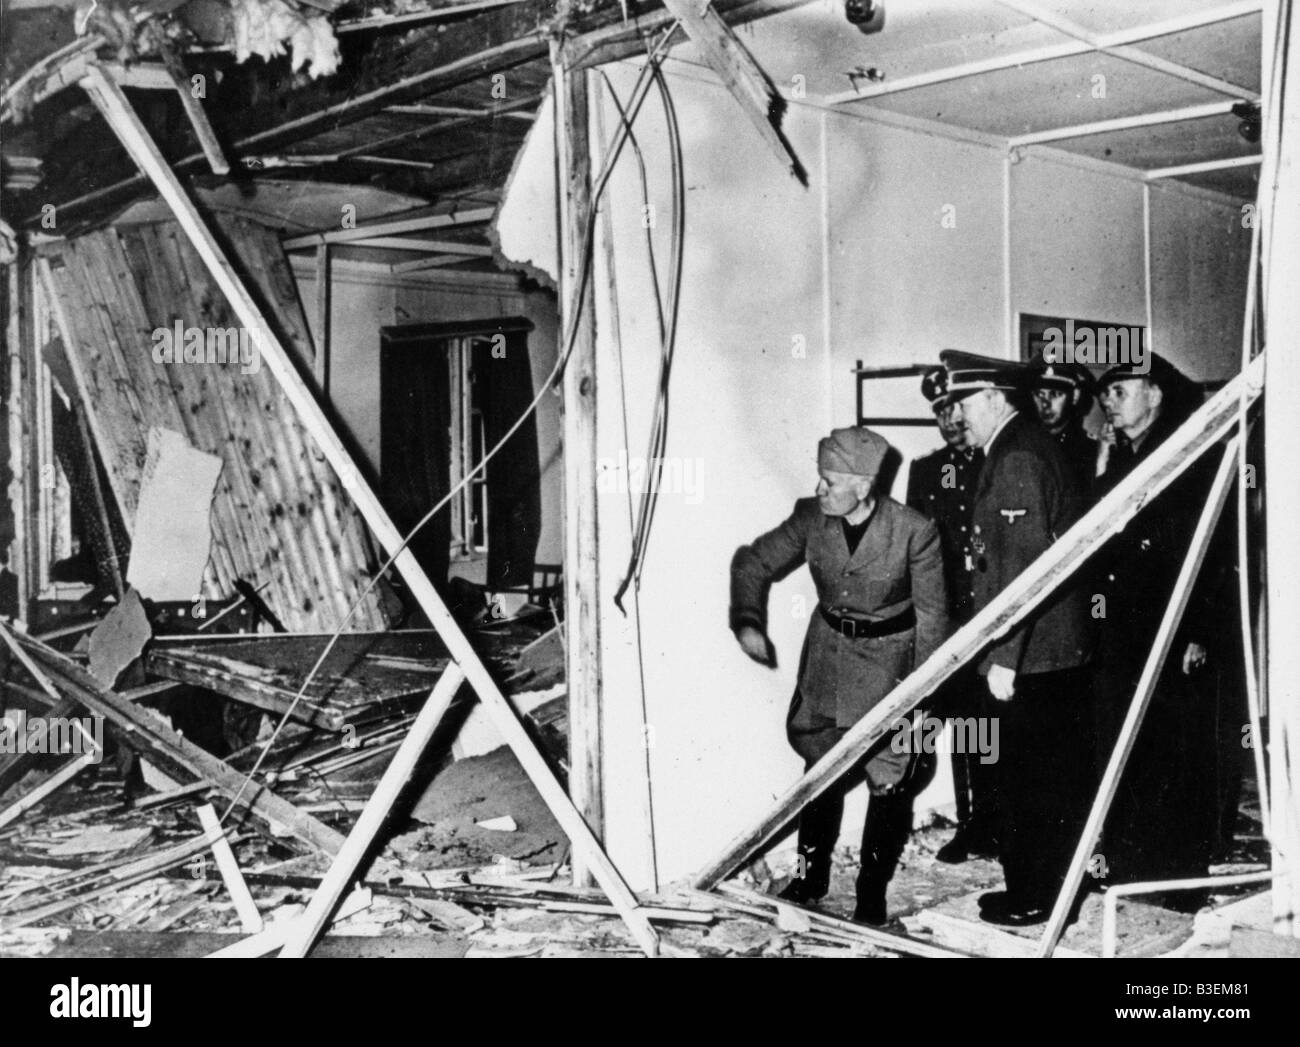 Hitler,Mussolini in destroyed HQ. Stock Photo